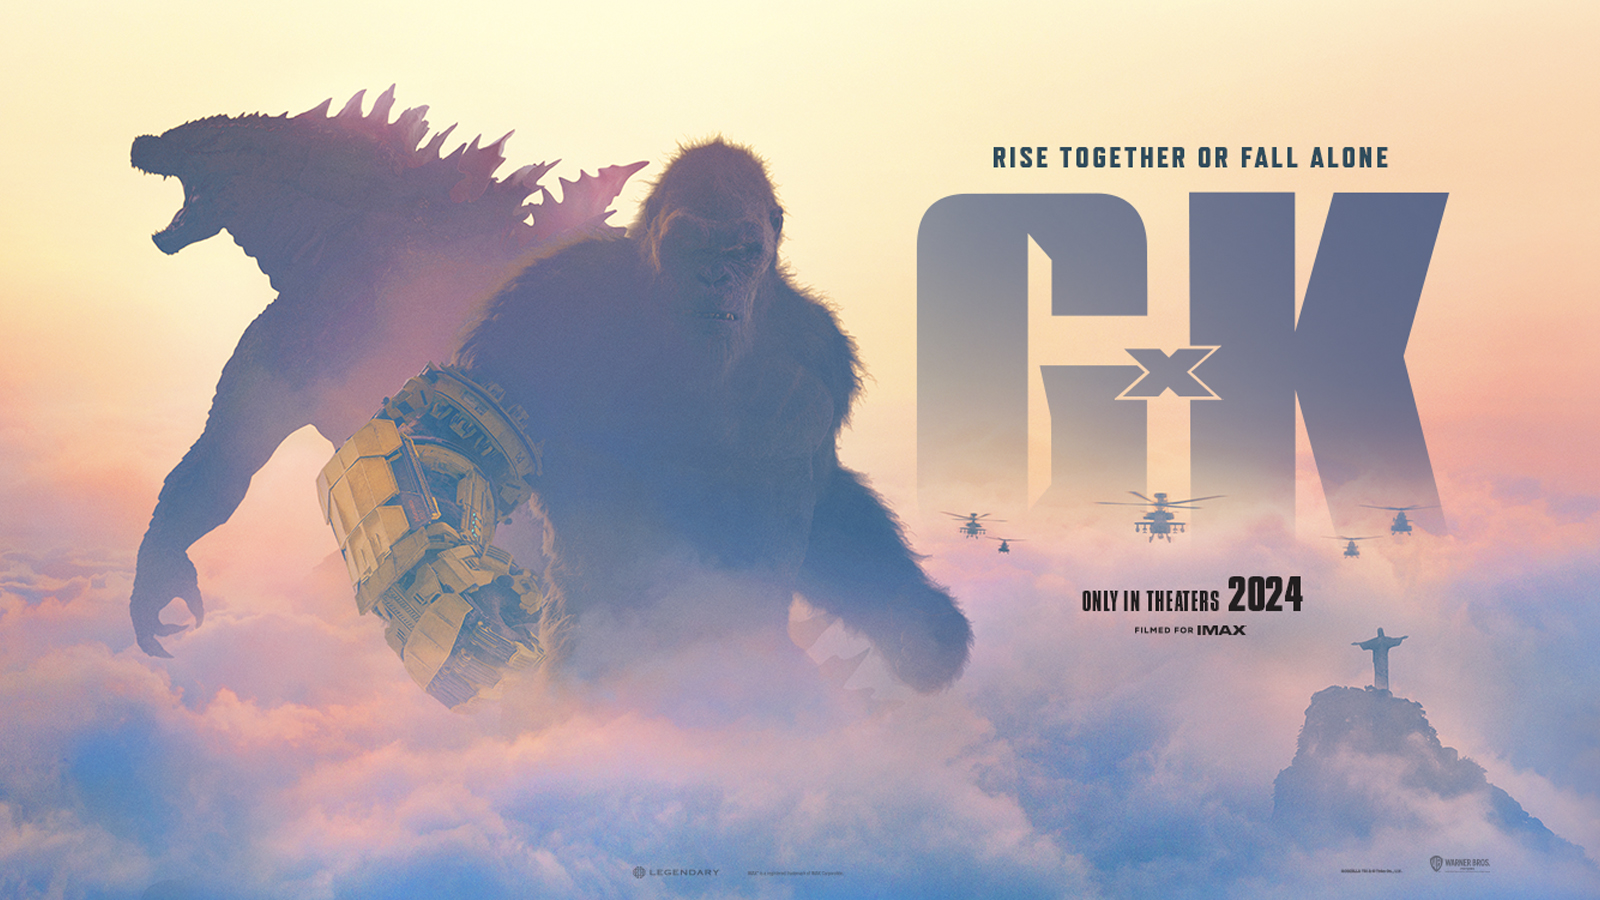 Godzilla x Kong: The New Empire wallpaper Resolution 1600x900 | Best Download this awesome wallpaper - Cool Wallpaper HD - CoolWallpaper-HD.com